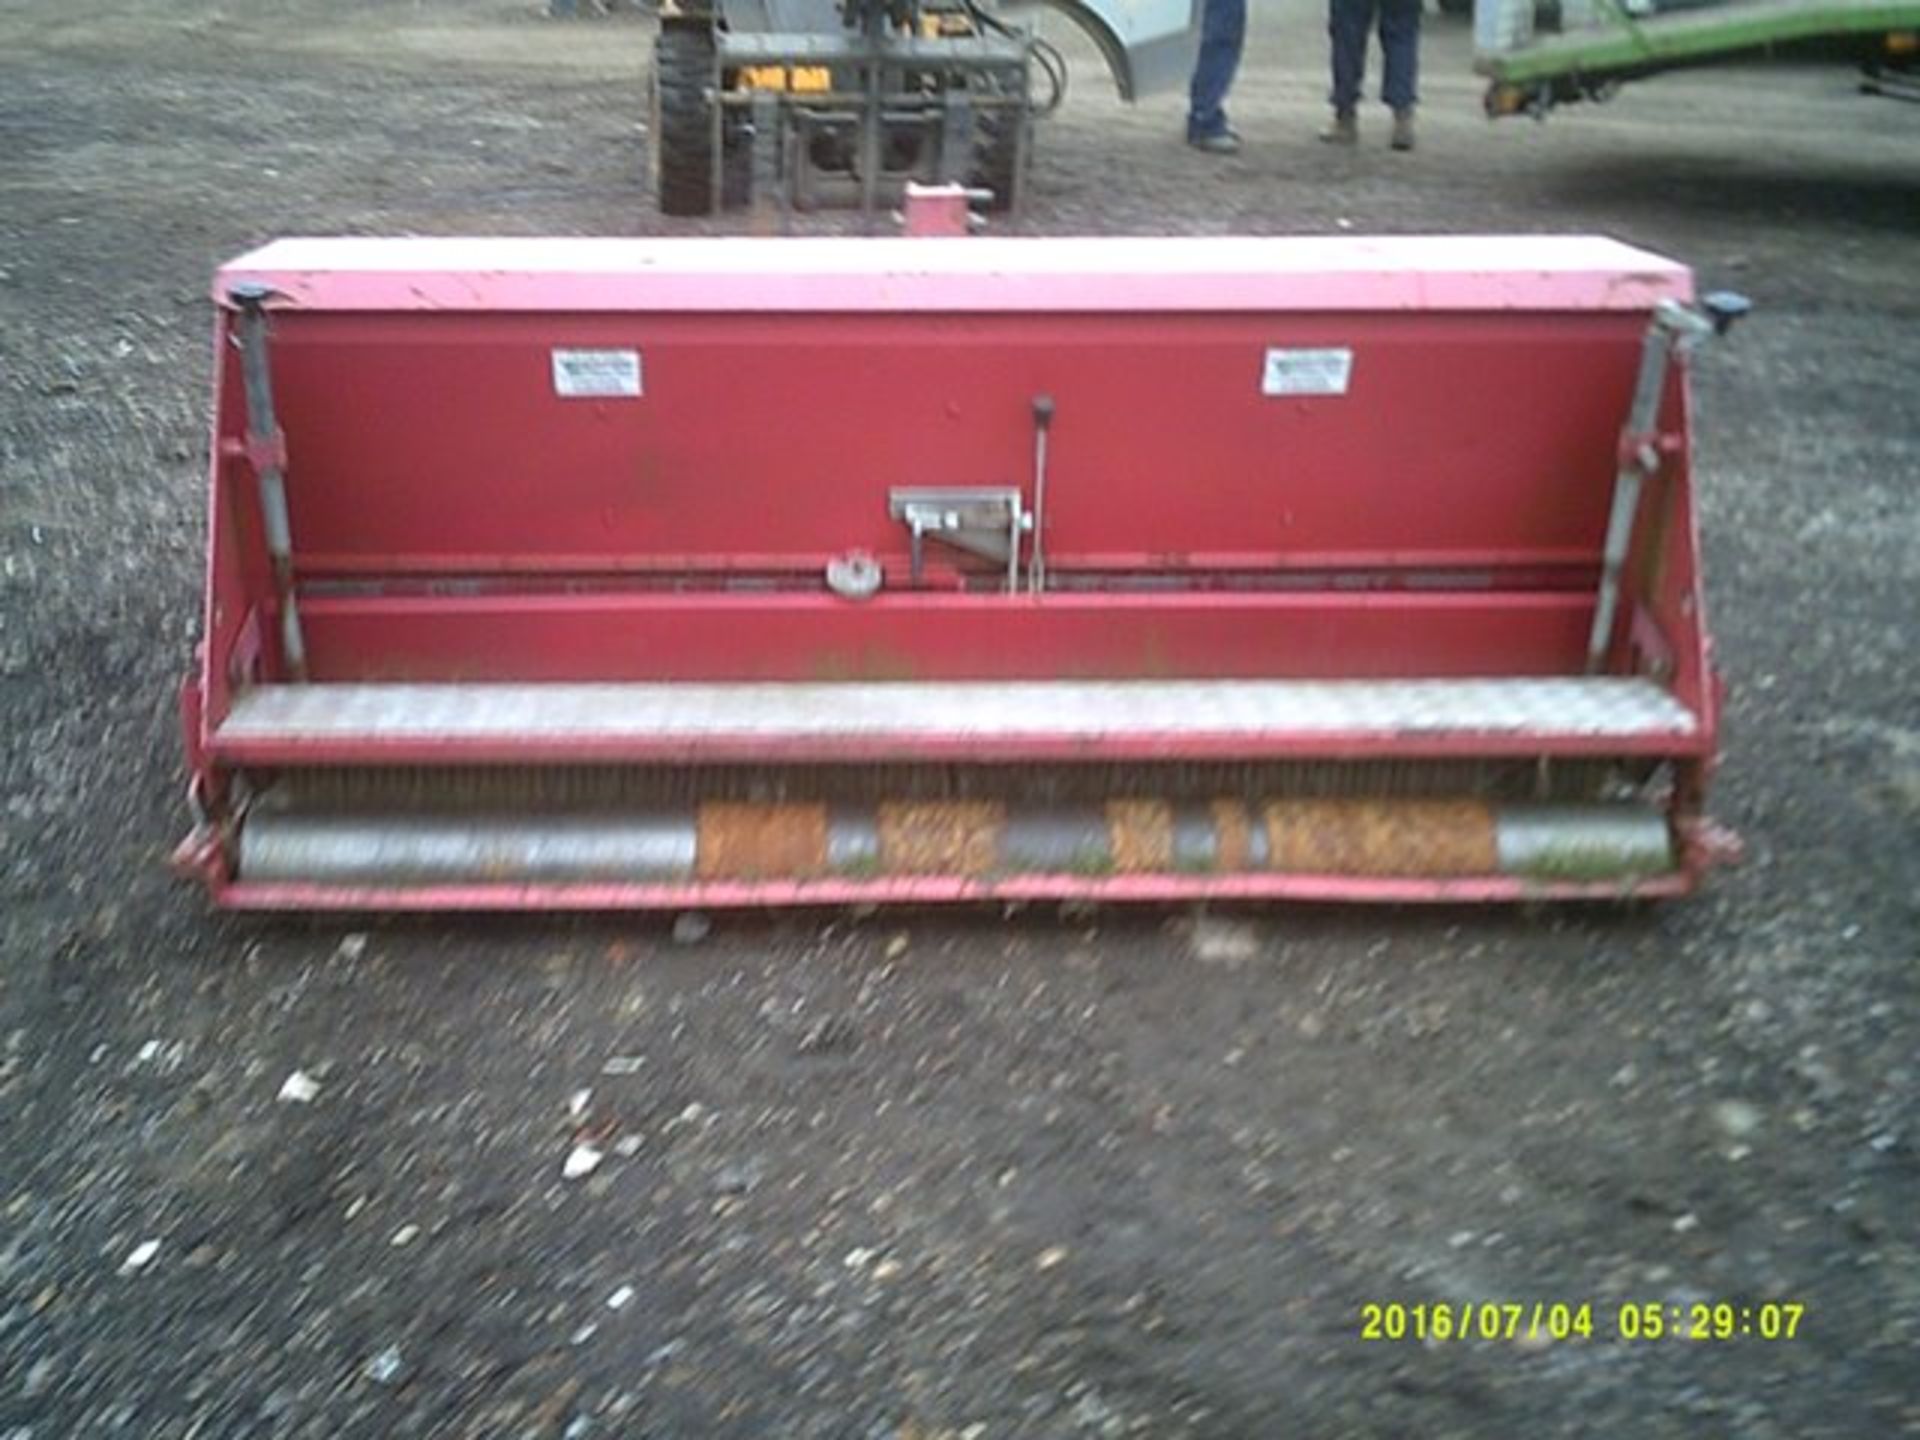 Blec 2100/02 multi seeder. Serial no. 80813, year 2008 - Image 4 of 4